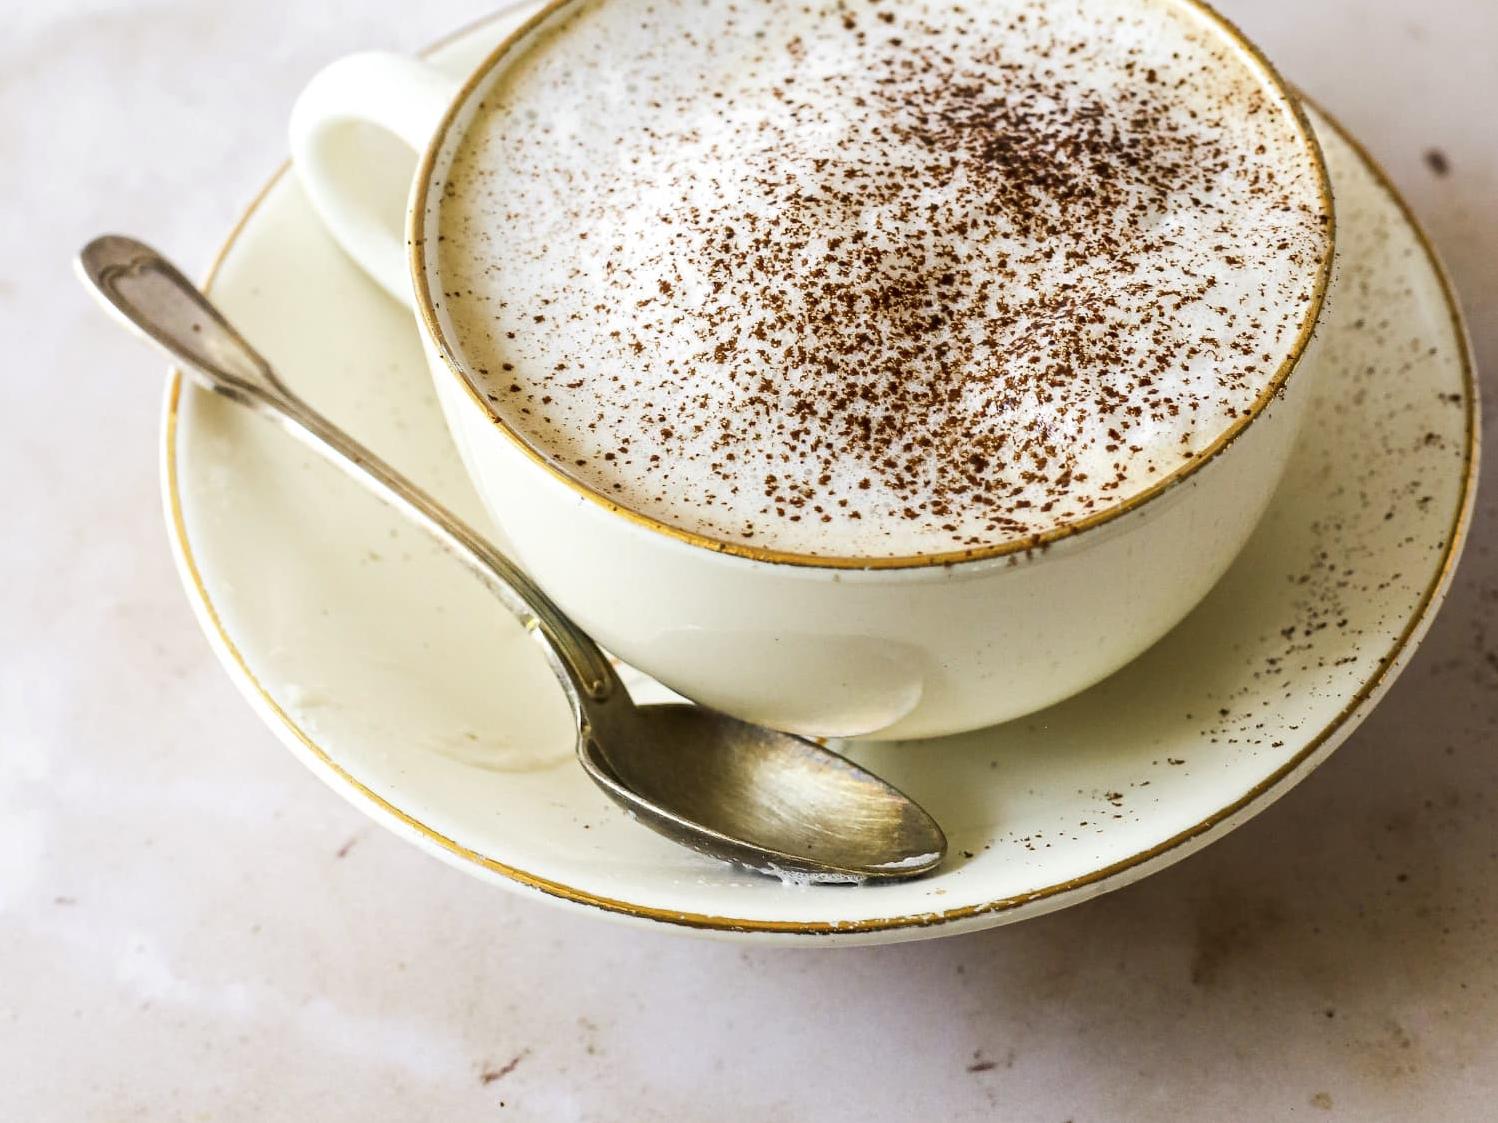  Espresso yourself with this bold drink.